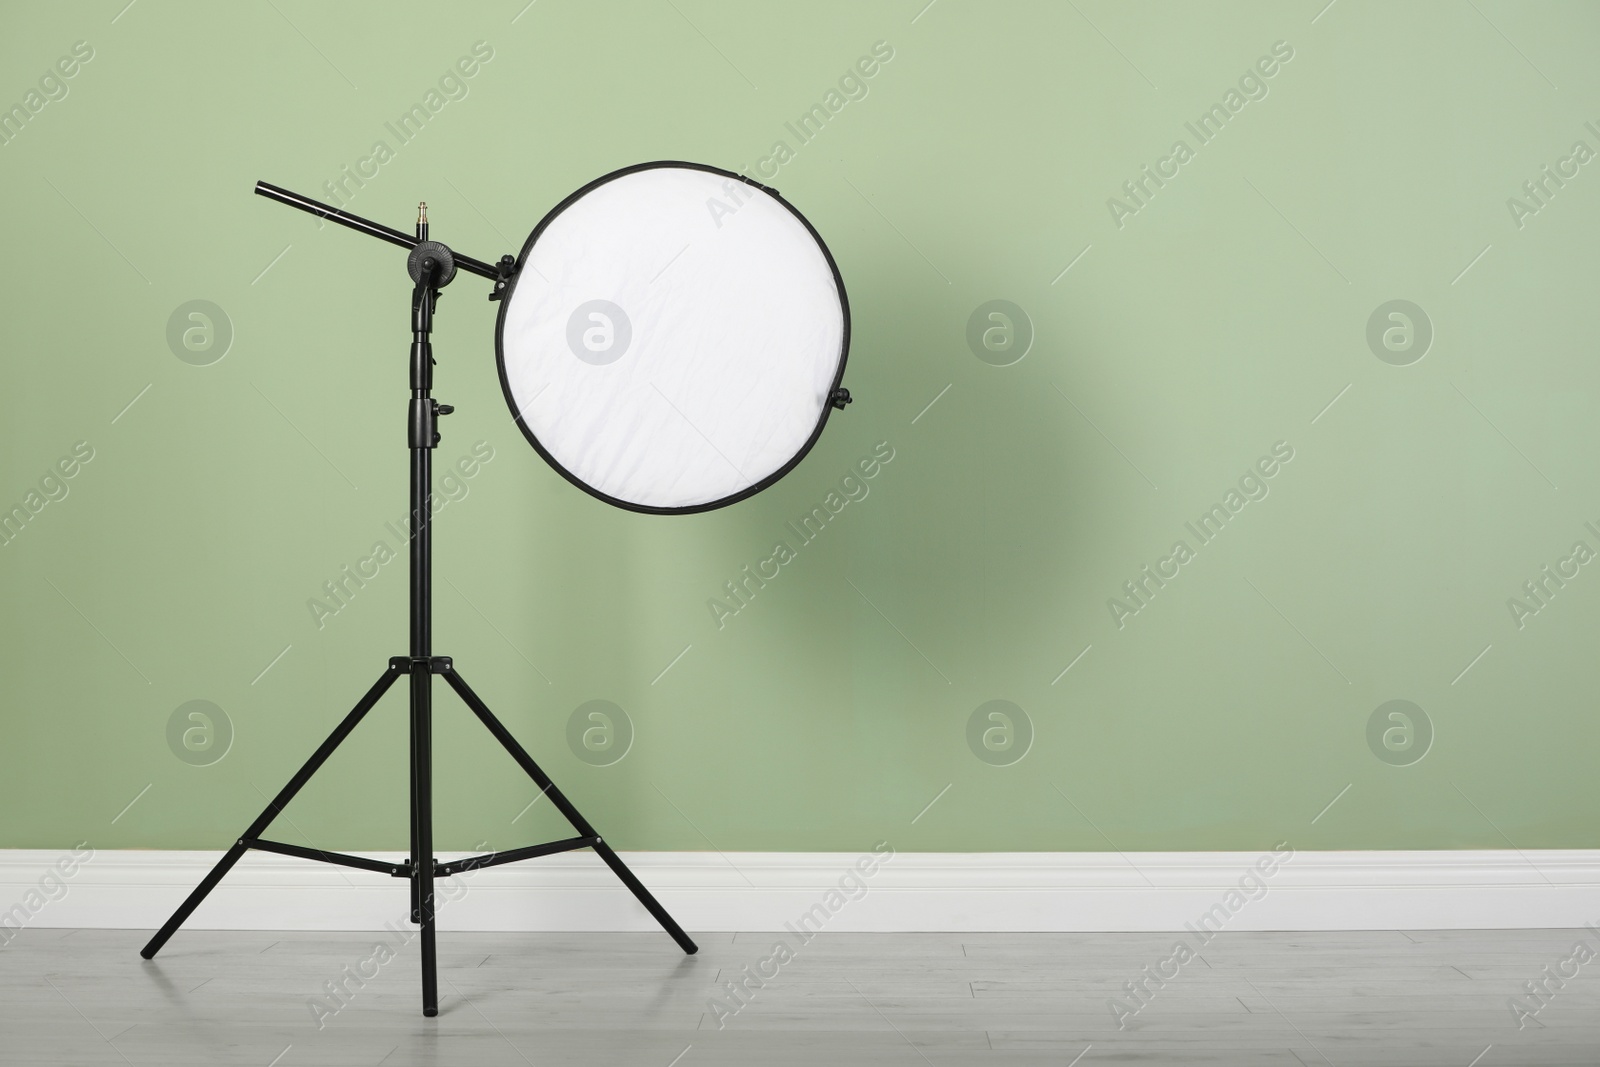 Photo of Studio reflector on tripod near pale green wall indoors, space for text. Professional photographer's equipment